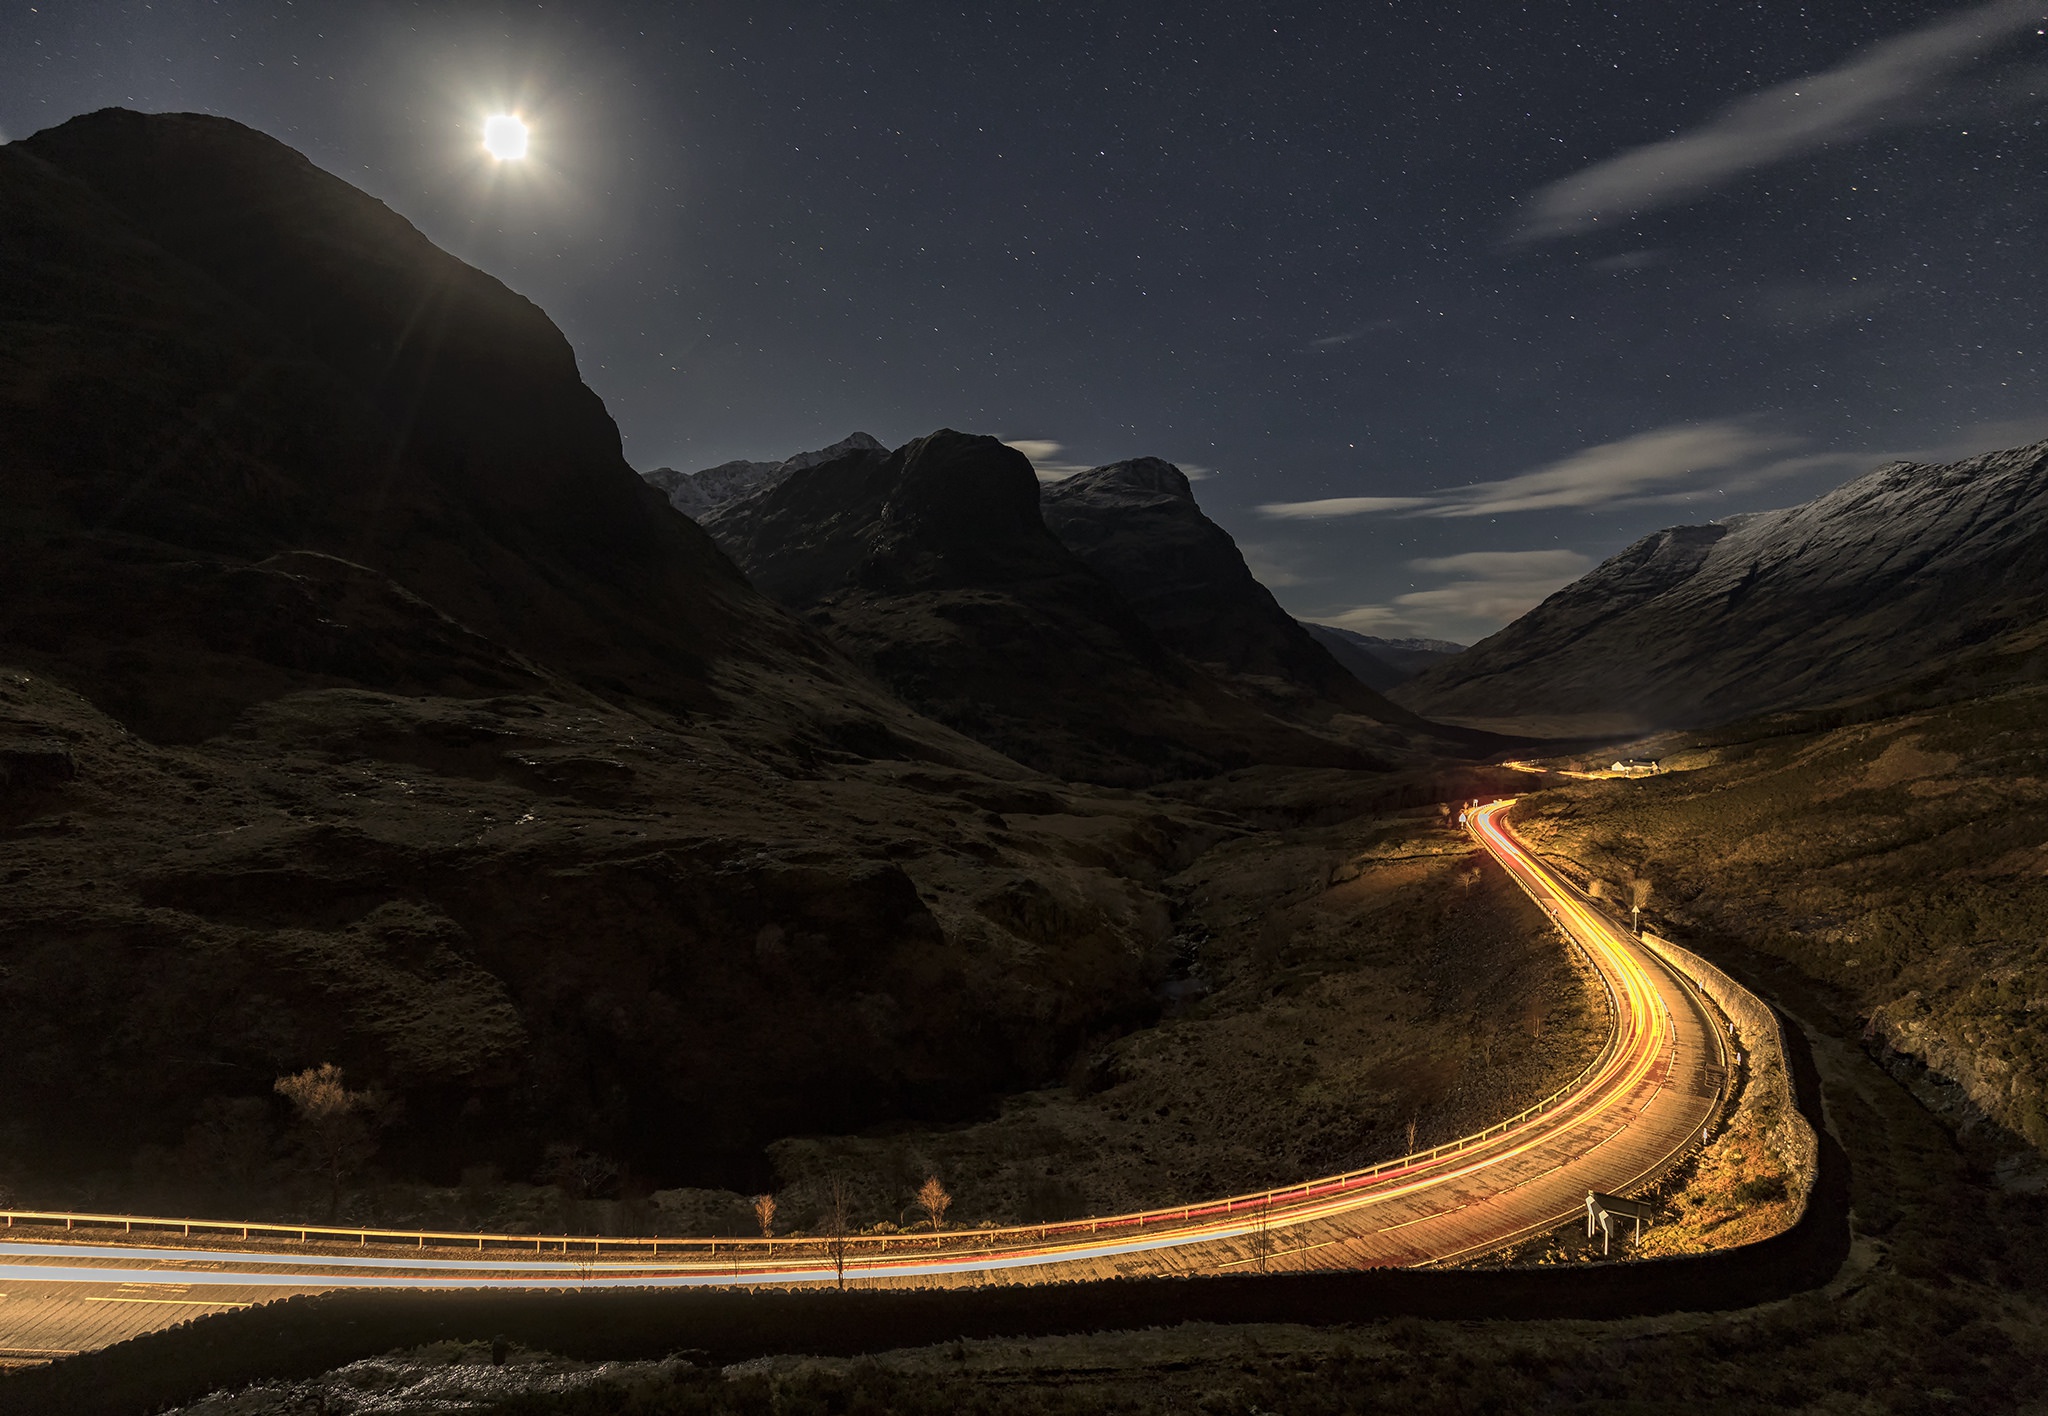 General 2048x1416 night mountains landscape road long exposure